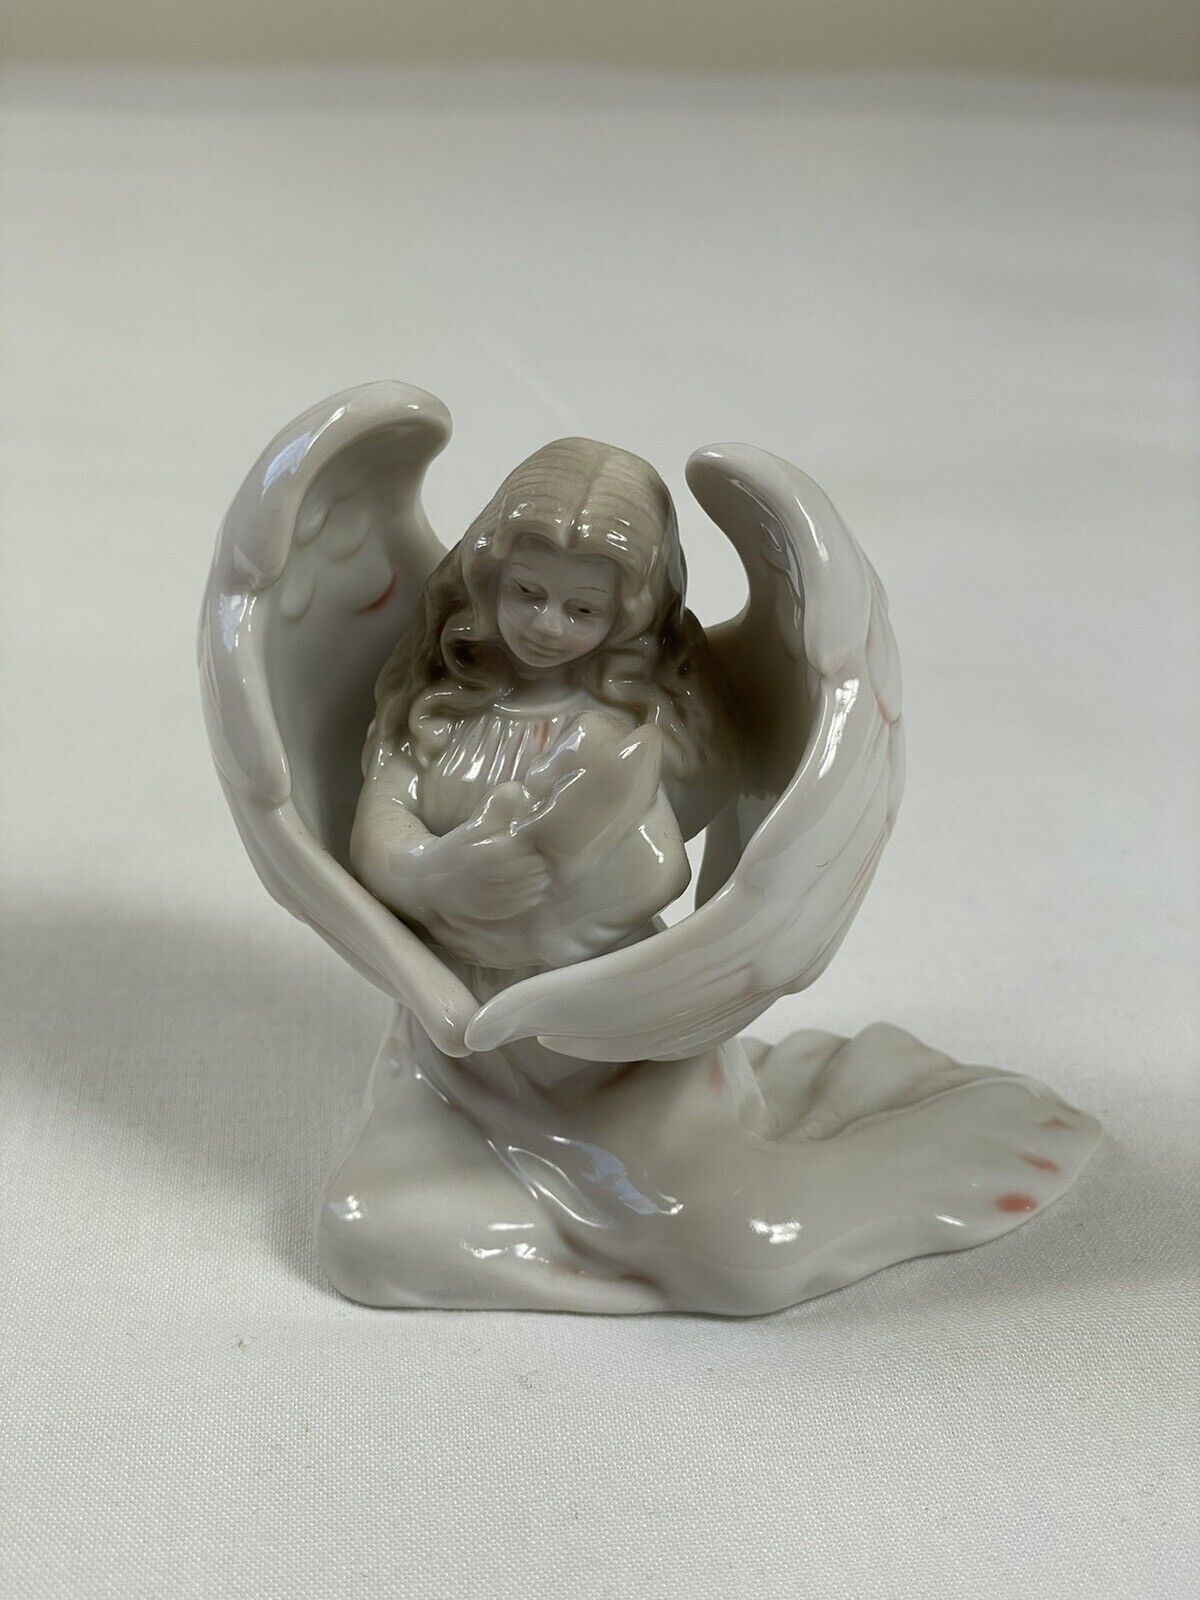 Porcelain Angel Figurine Holding a Baby by Russ Berrie & Co. Item No. 15482